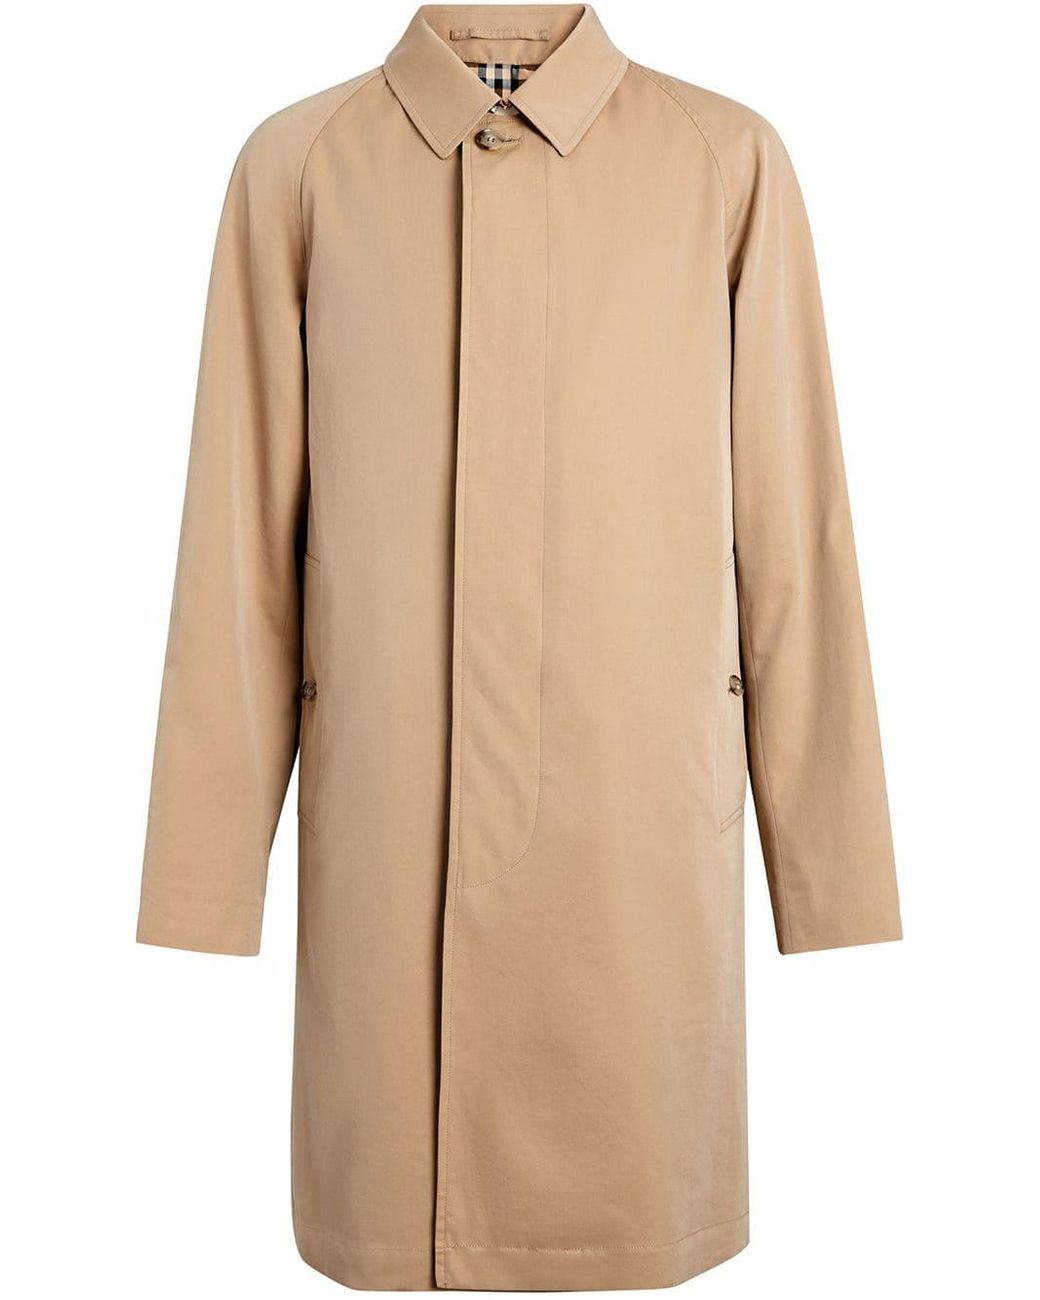 Burberry Cotton The Camden Car Coat in Beige (Natural) for Men - Save ...